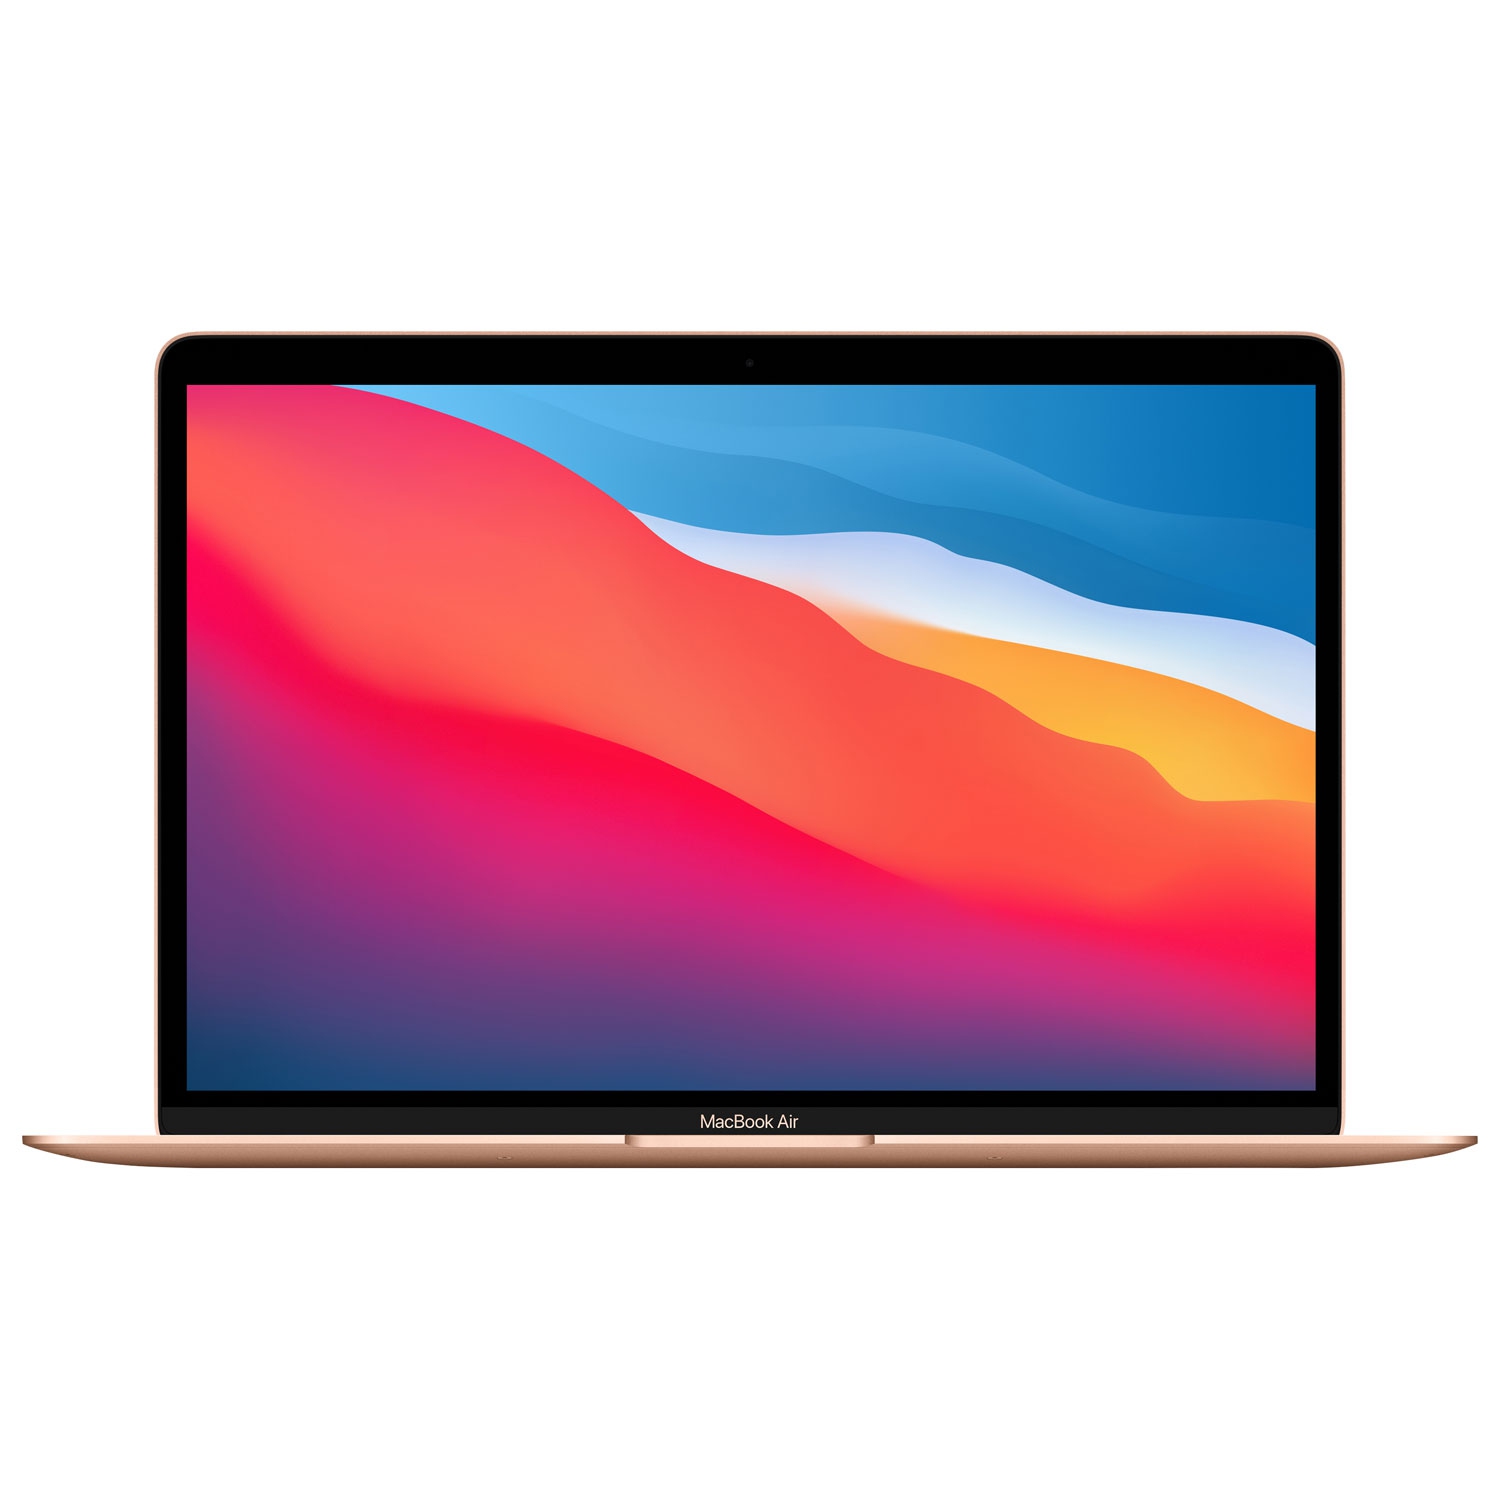 Refurbished (Excellent) - Apple MacBook Air 13.3" w/ Touch ID (Fall 2020) - Gold (Apple M1 Chip / 512GB SSD / 8GB RAM) - En